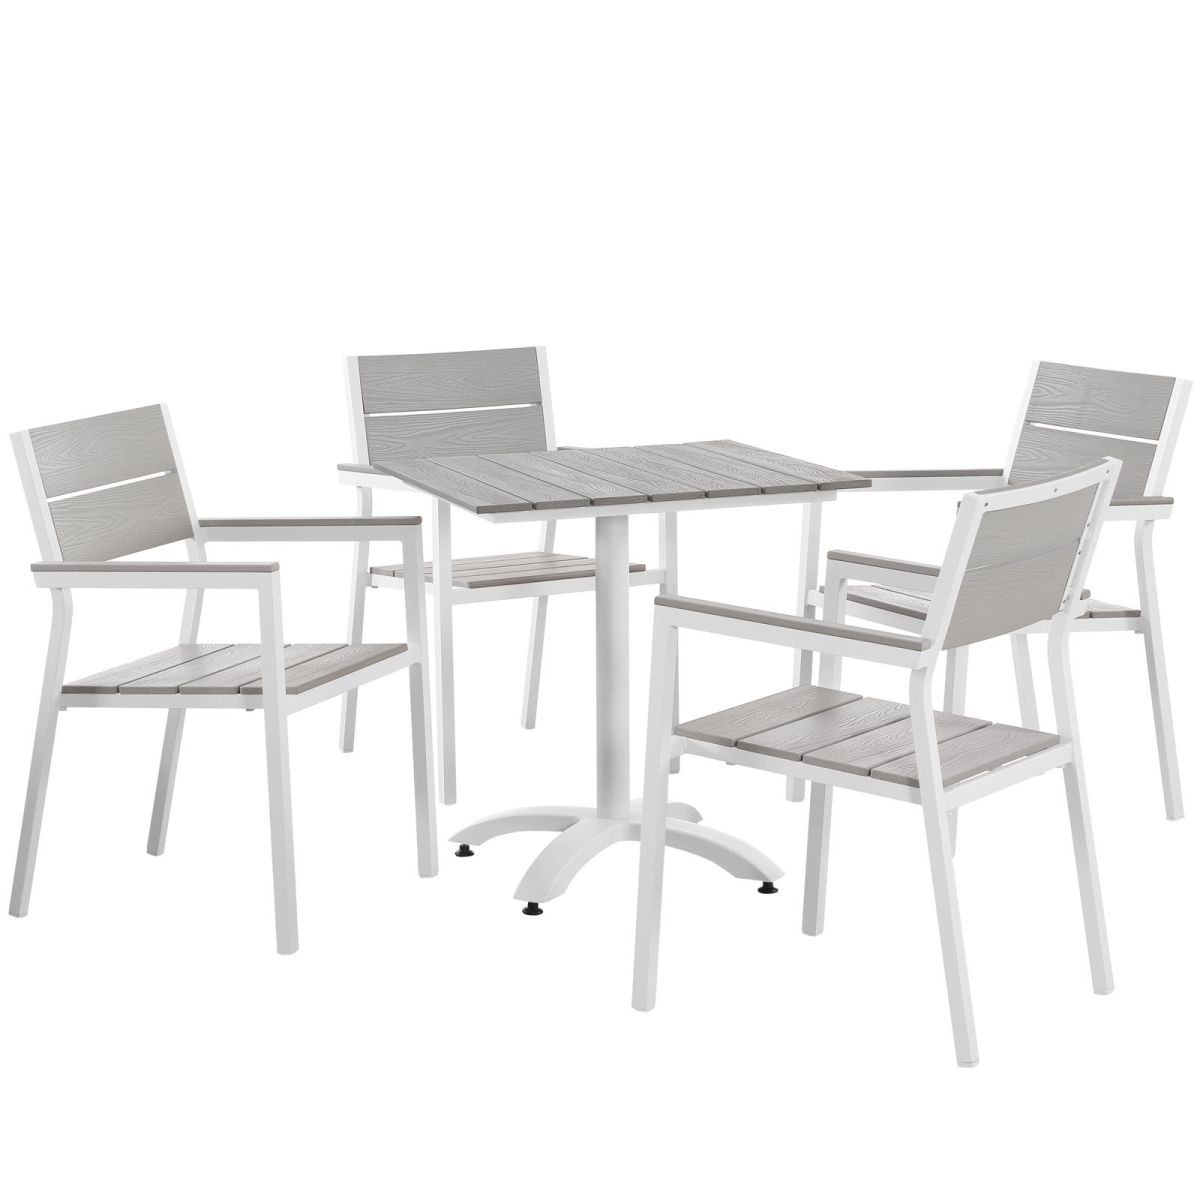 Eastend Eei-1761-whi-lgr-set 5 Piece Maine Outdoor Patio Dining Set Gray Plywood With White Aluminum Frame